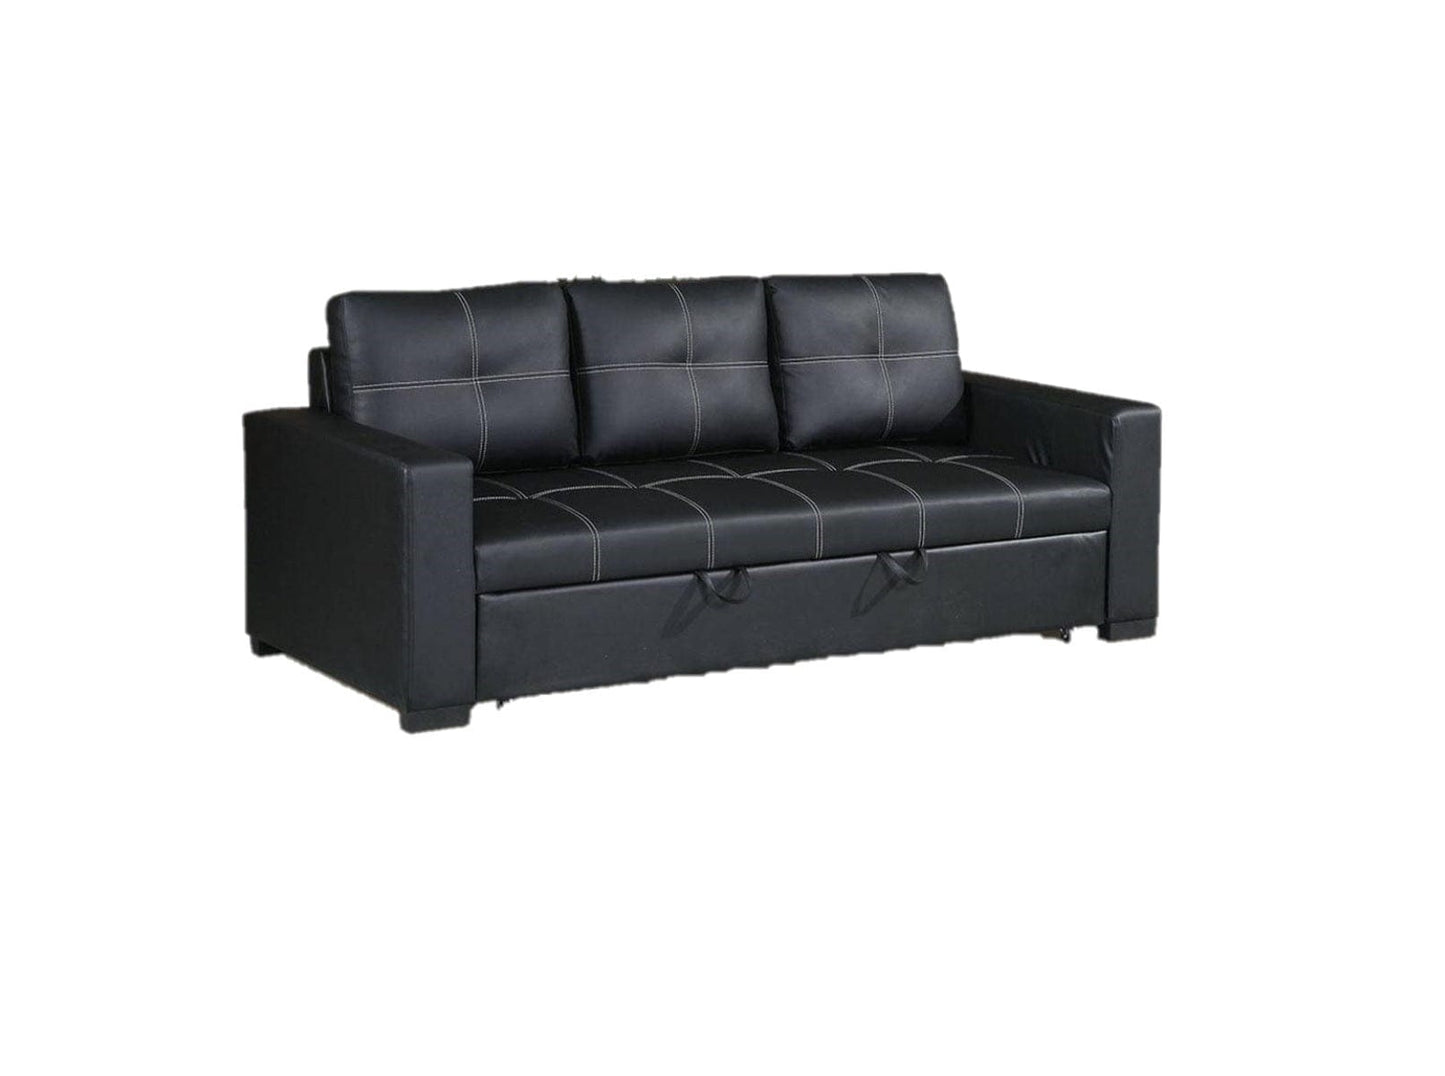 Sectional Sofa Pull out Bed Living Room Couch Black Faux Leather Tufted Convertible Sofa